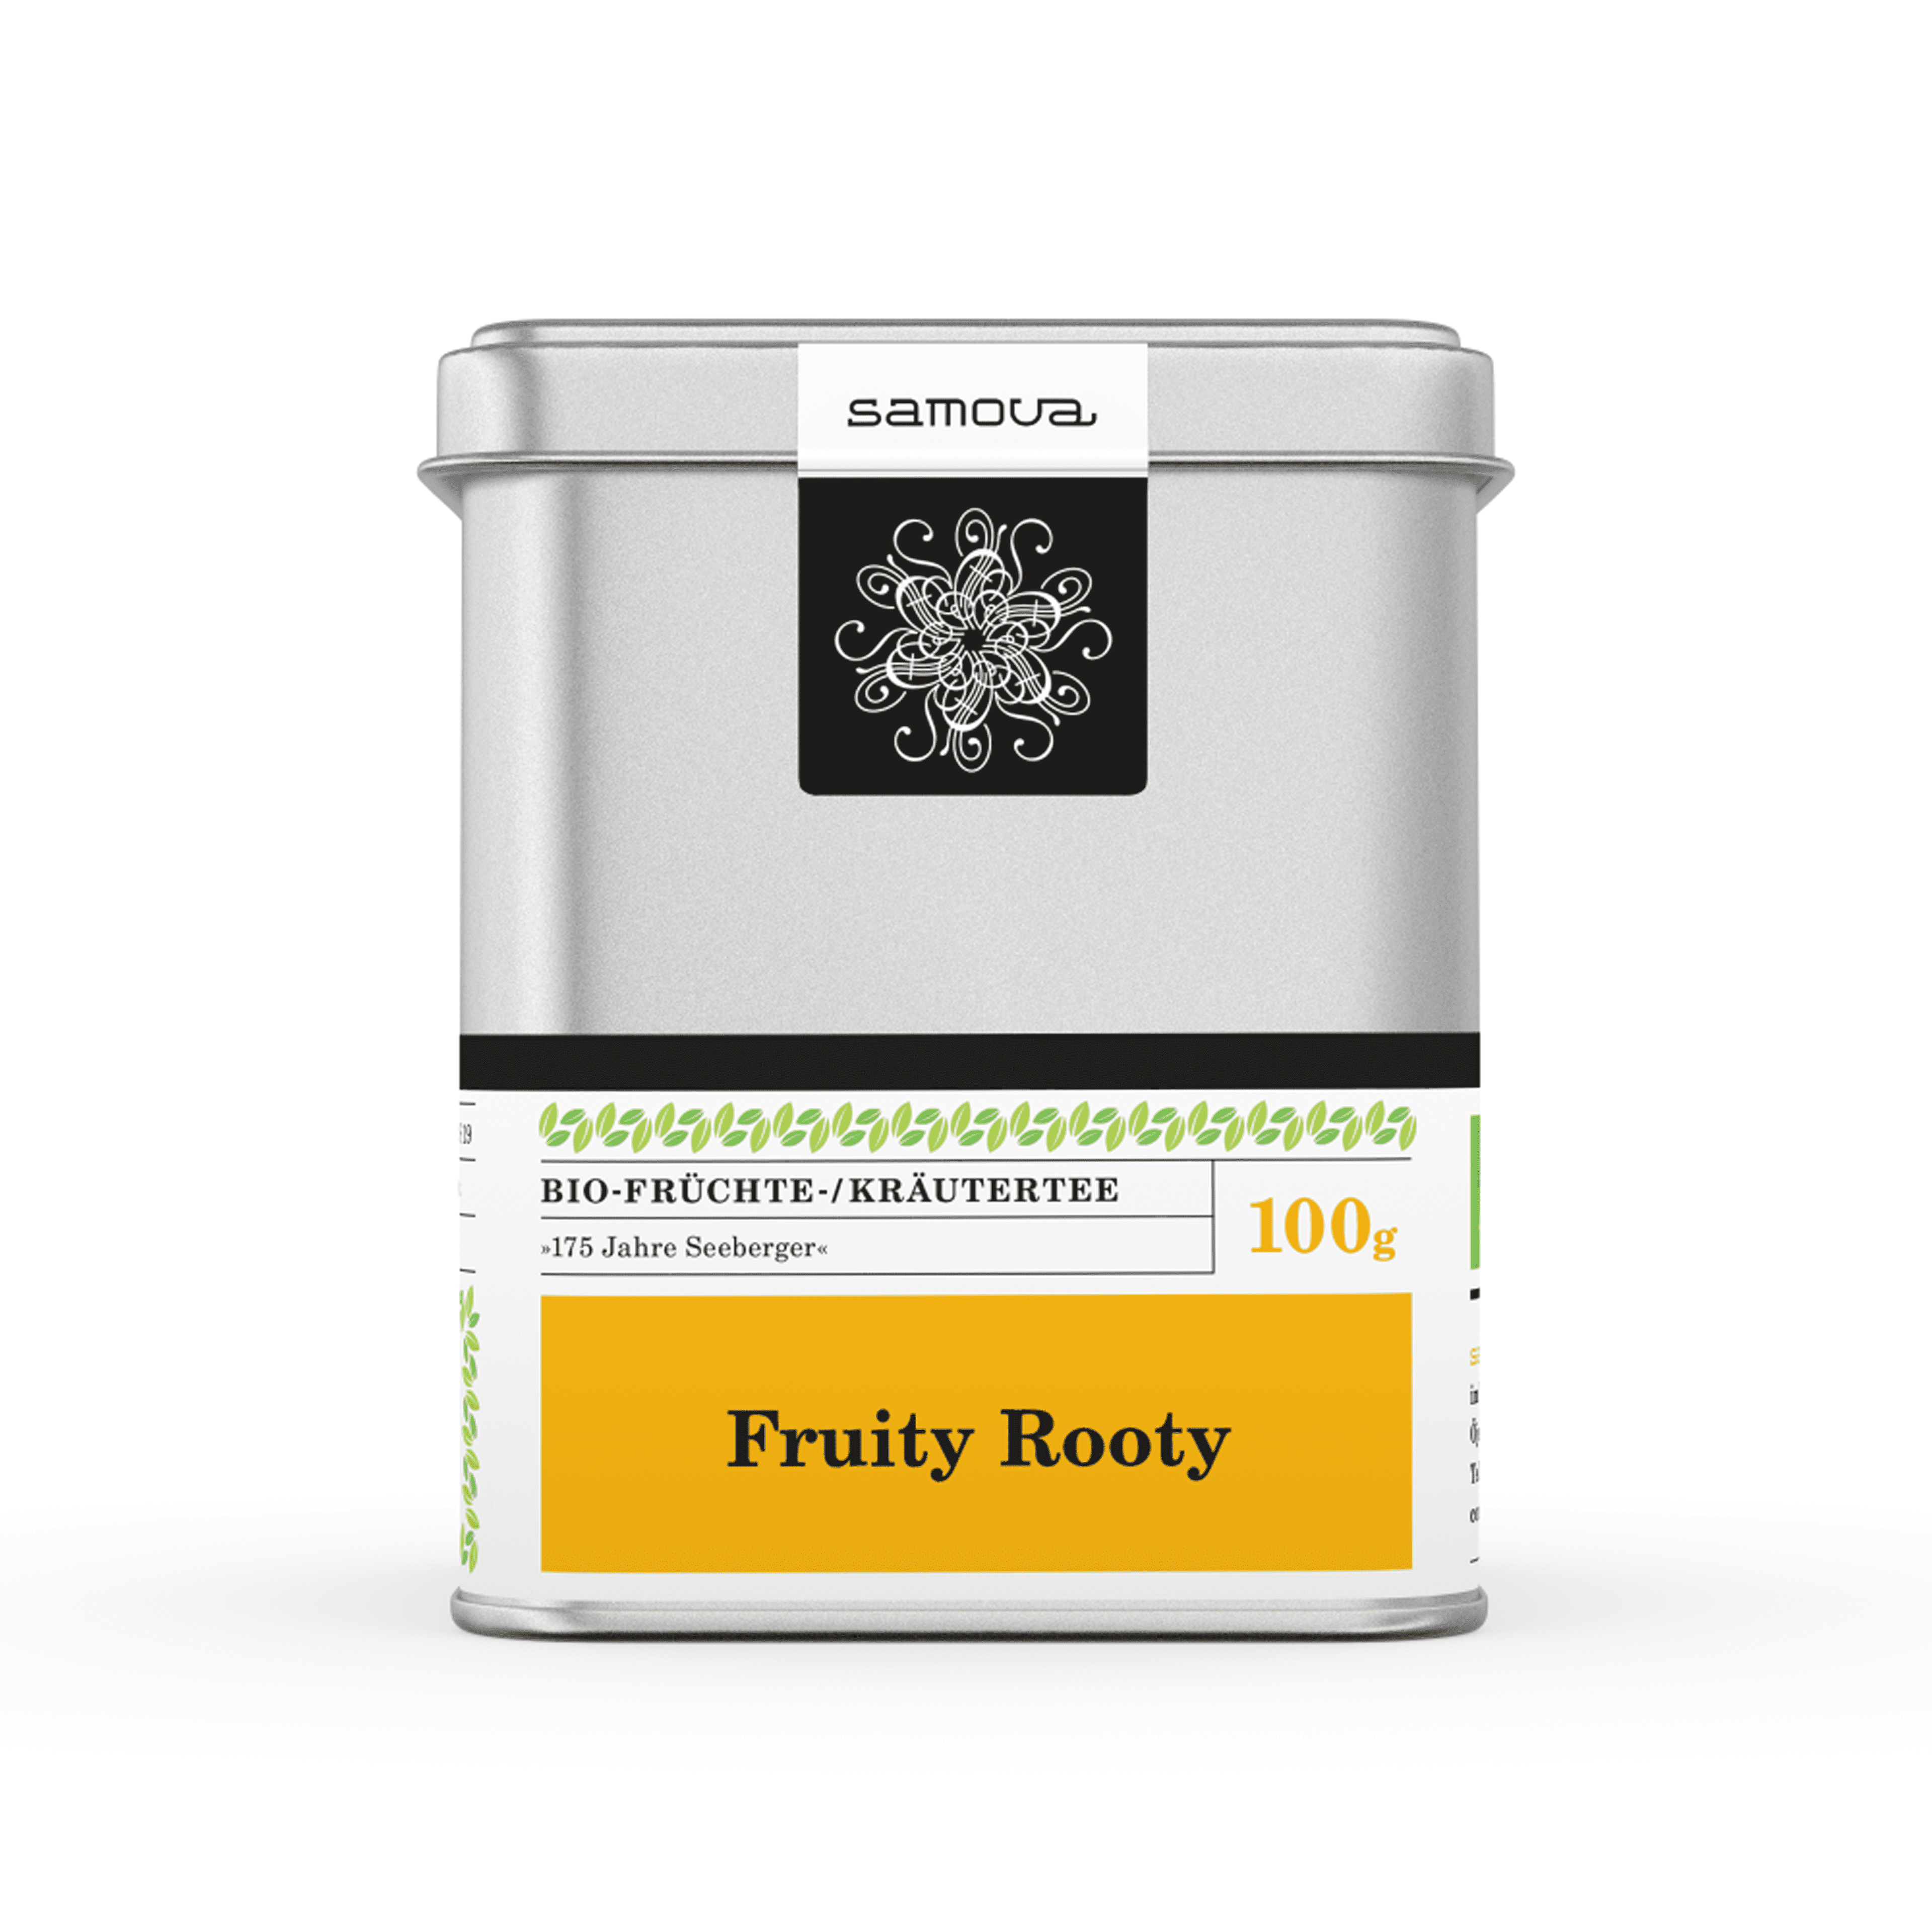 Can of Fruity Rooty tea